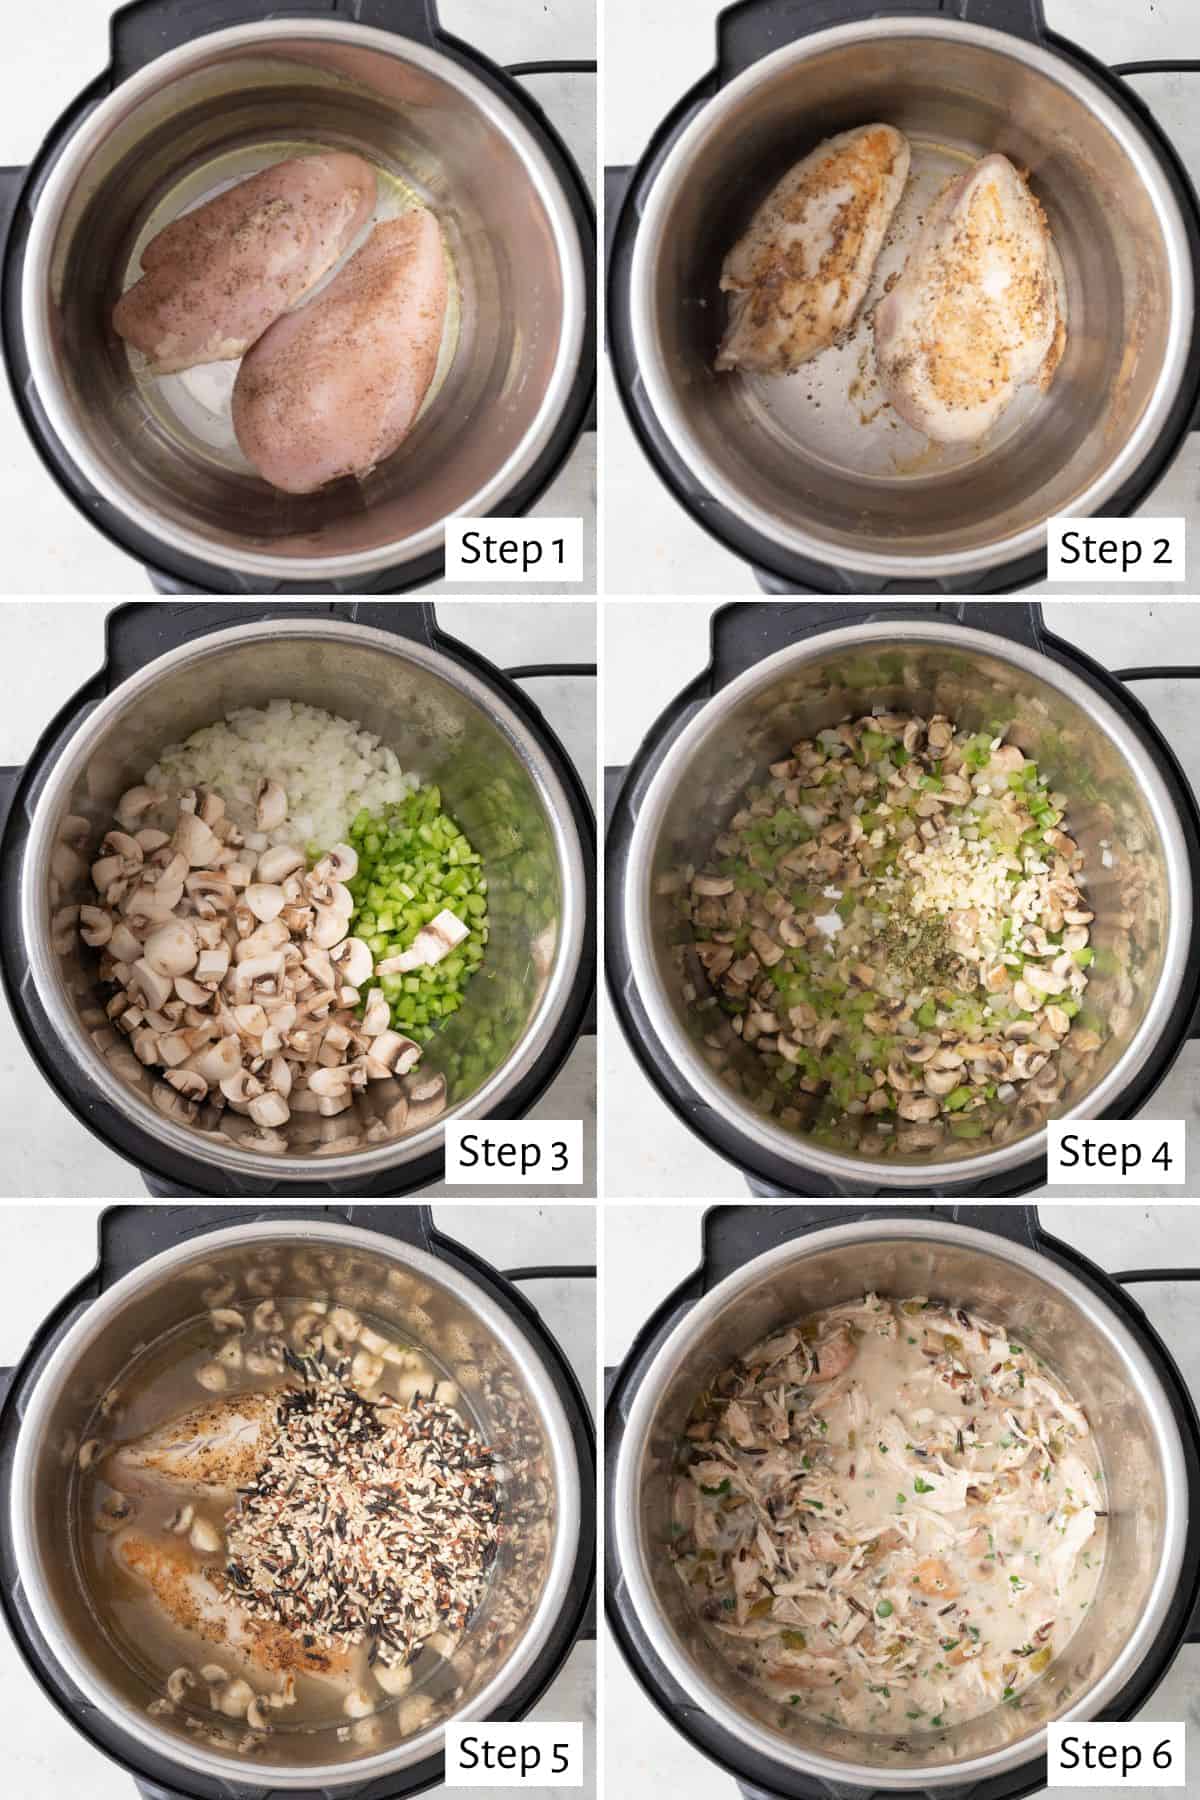 6 image collage making recipe in an instant pot: 1- seasoned chicken breasts added to pot, 2- chicken after flipping, 3- chicken removed with diced veggies added before cooking, 4- after cooking vegetables, 5- broth, cooked chicken, and rice added, 6- after rice is cooked with chicken shredded and yogurt added.